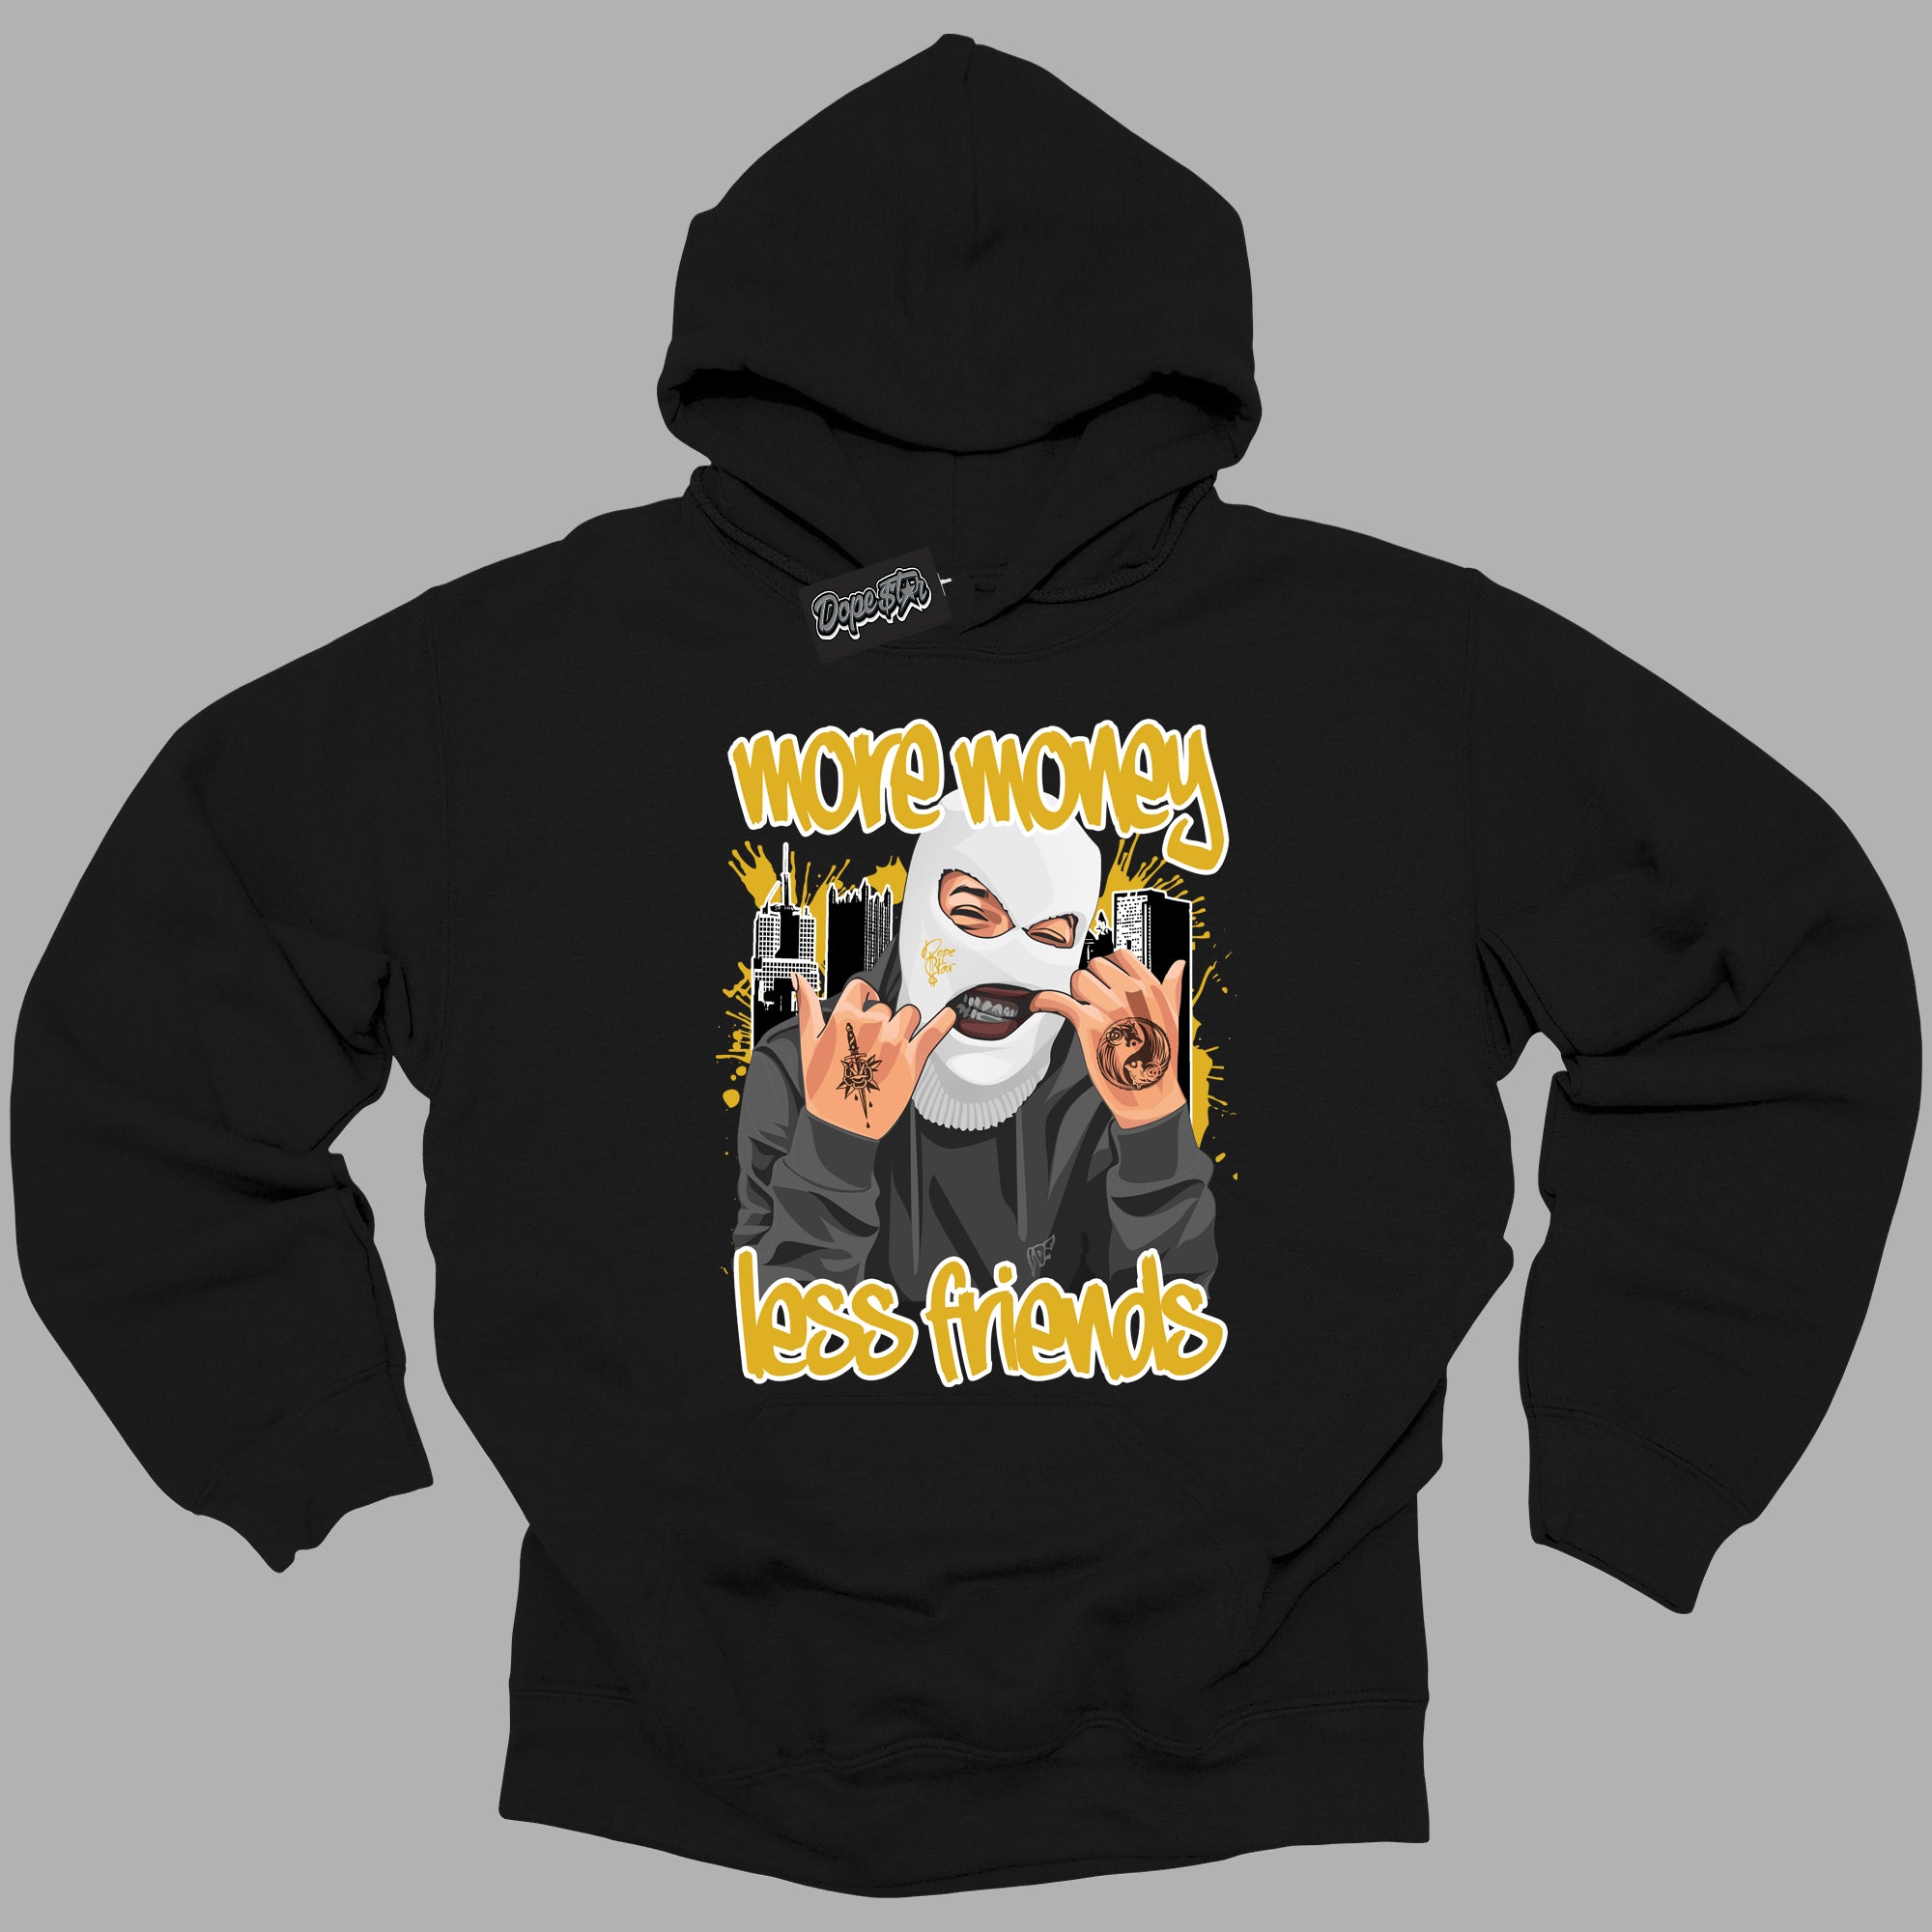 Cool Black Hoodie with “More Money Less Friends ”  design that Perfectly Matches Yellow Ochre 6s Sneakers.